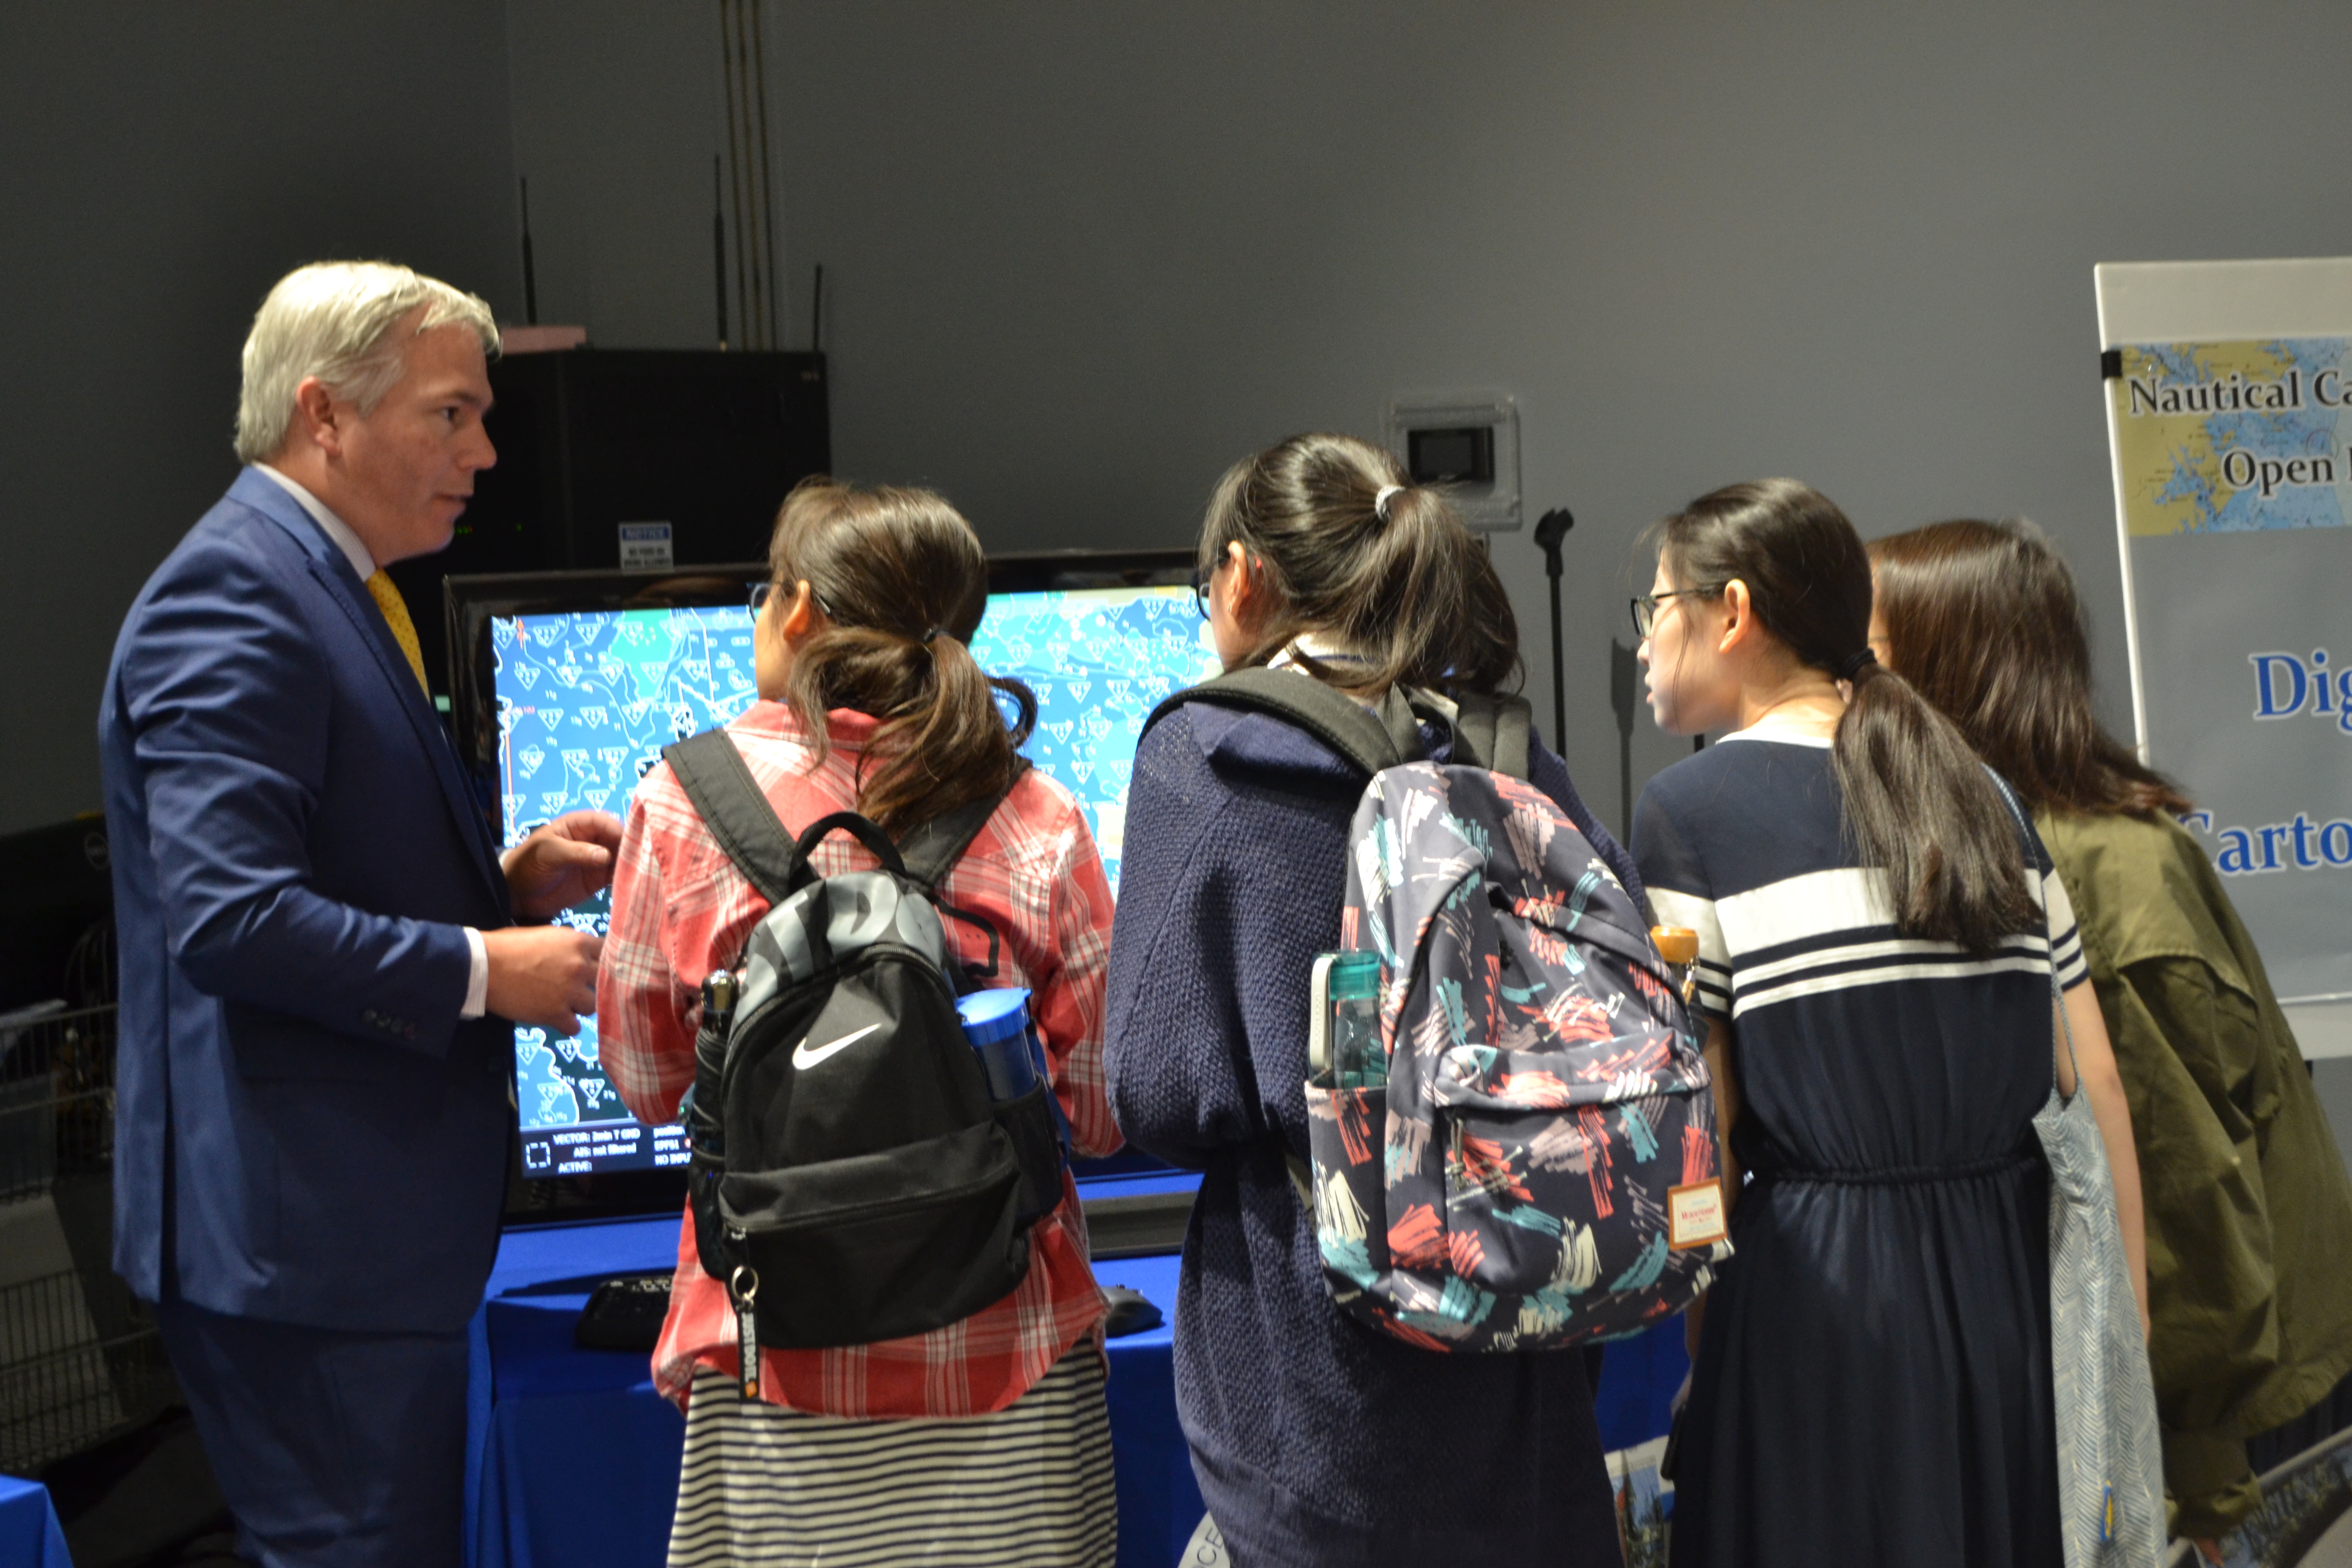 Sean Legeer shows a digital cartography display to visiting students.